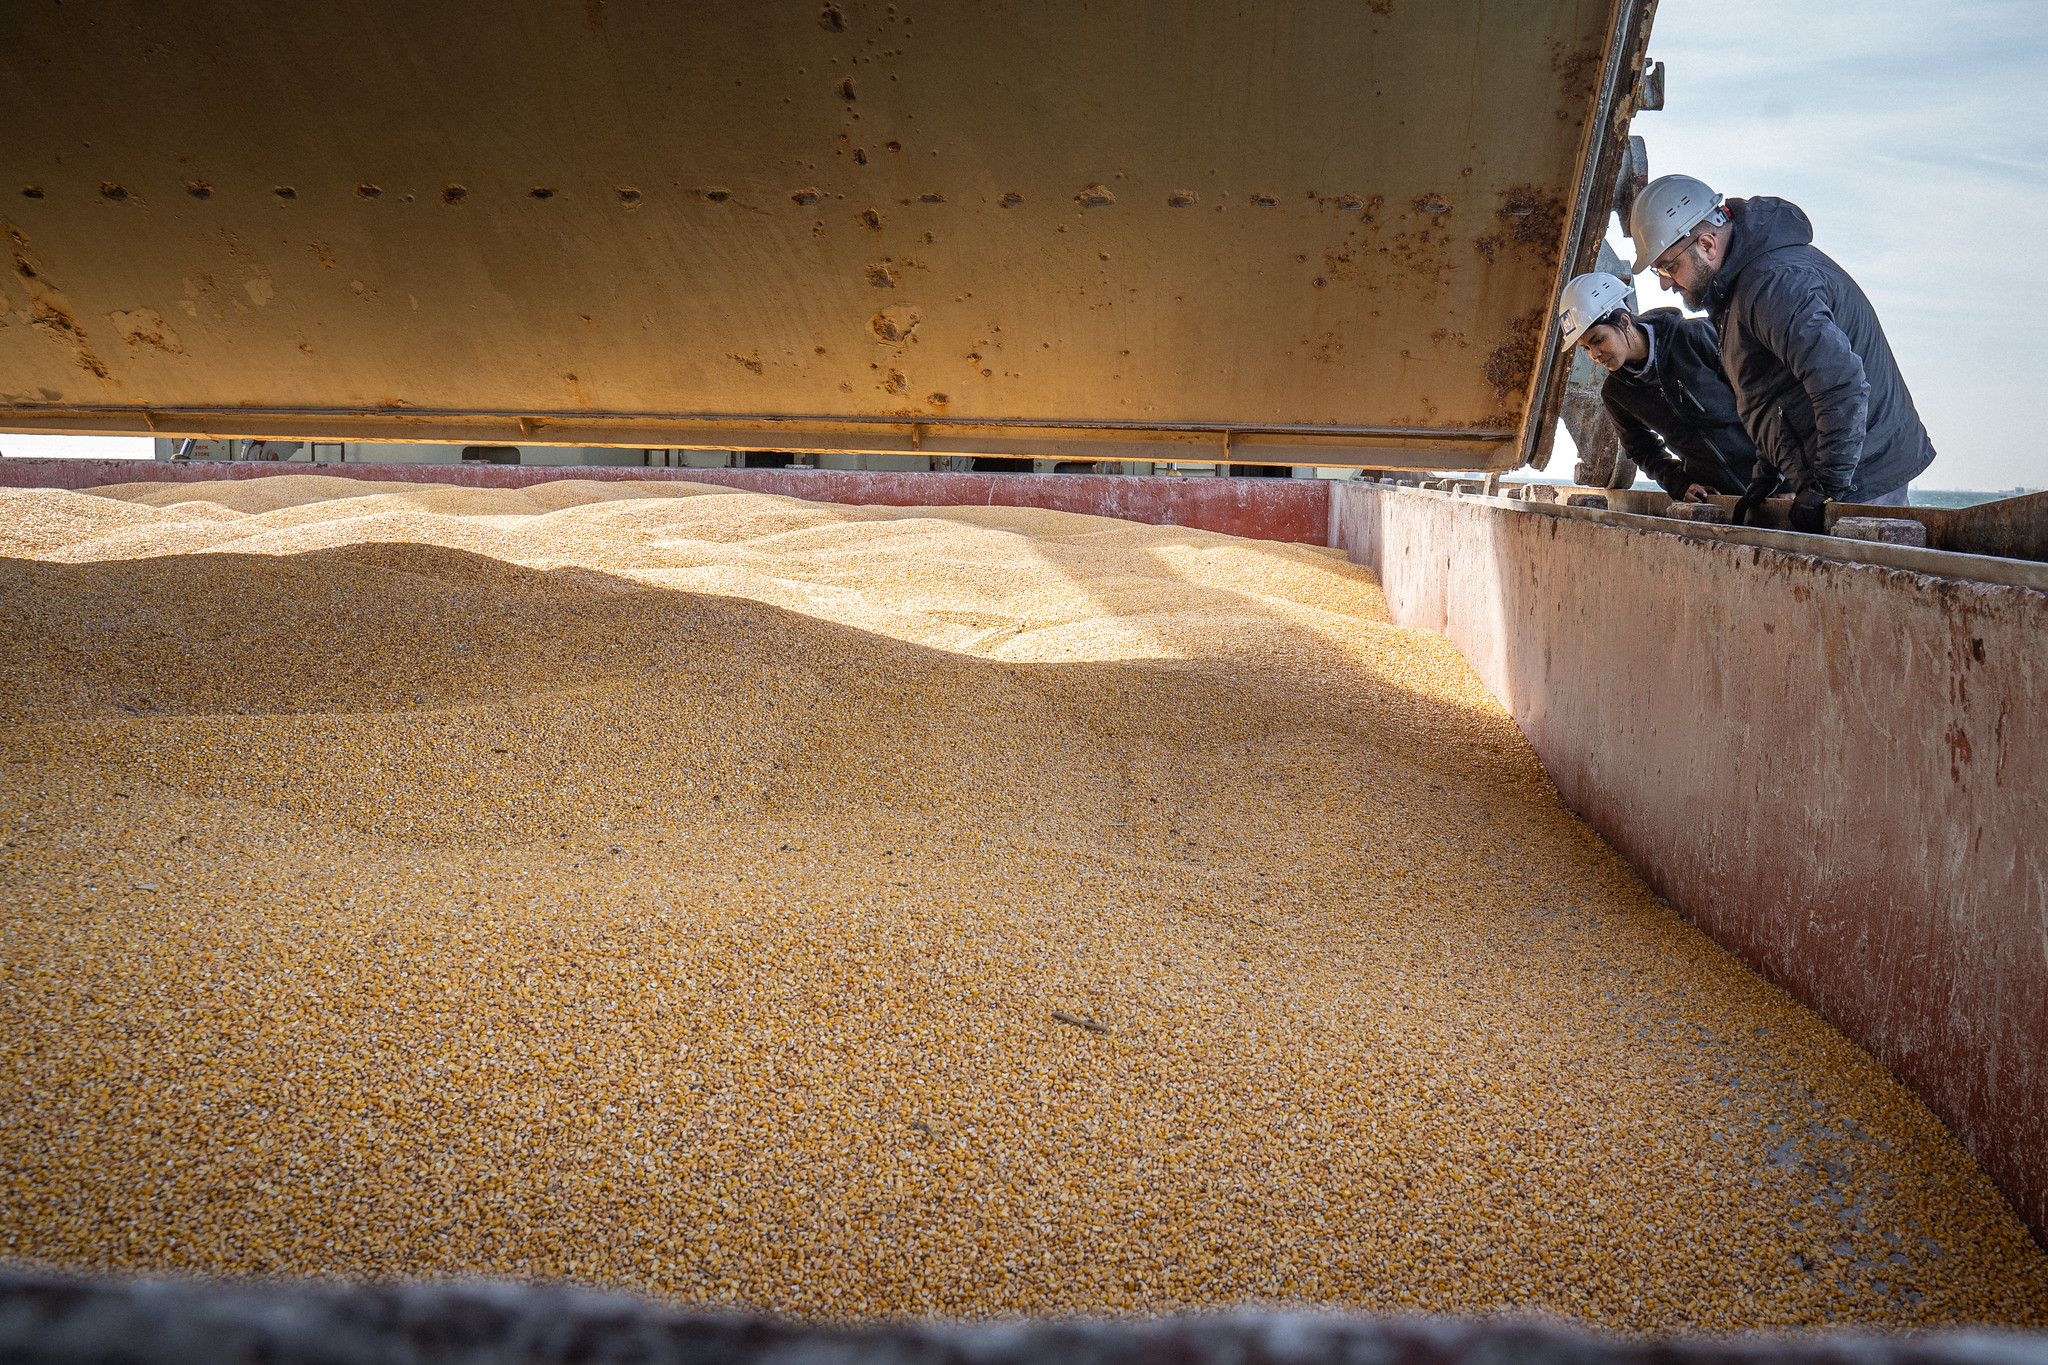 Ukrainian grain exports from the port of Odesa via the UN’s Black Sea Grain Initiative being inspected, 21 March 2023. © United Nations Office on Drugs and Crime via Flickr. 